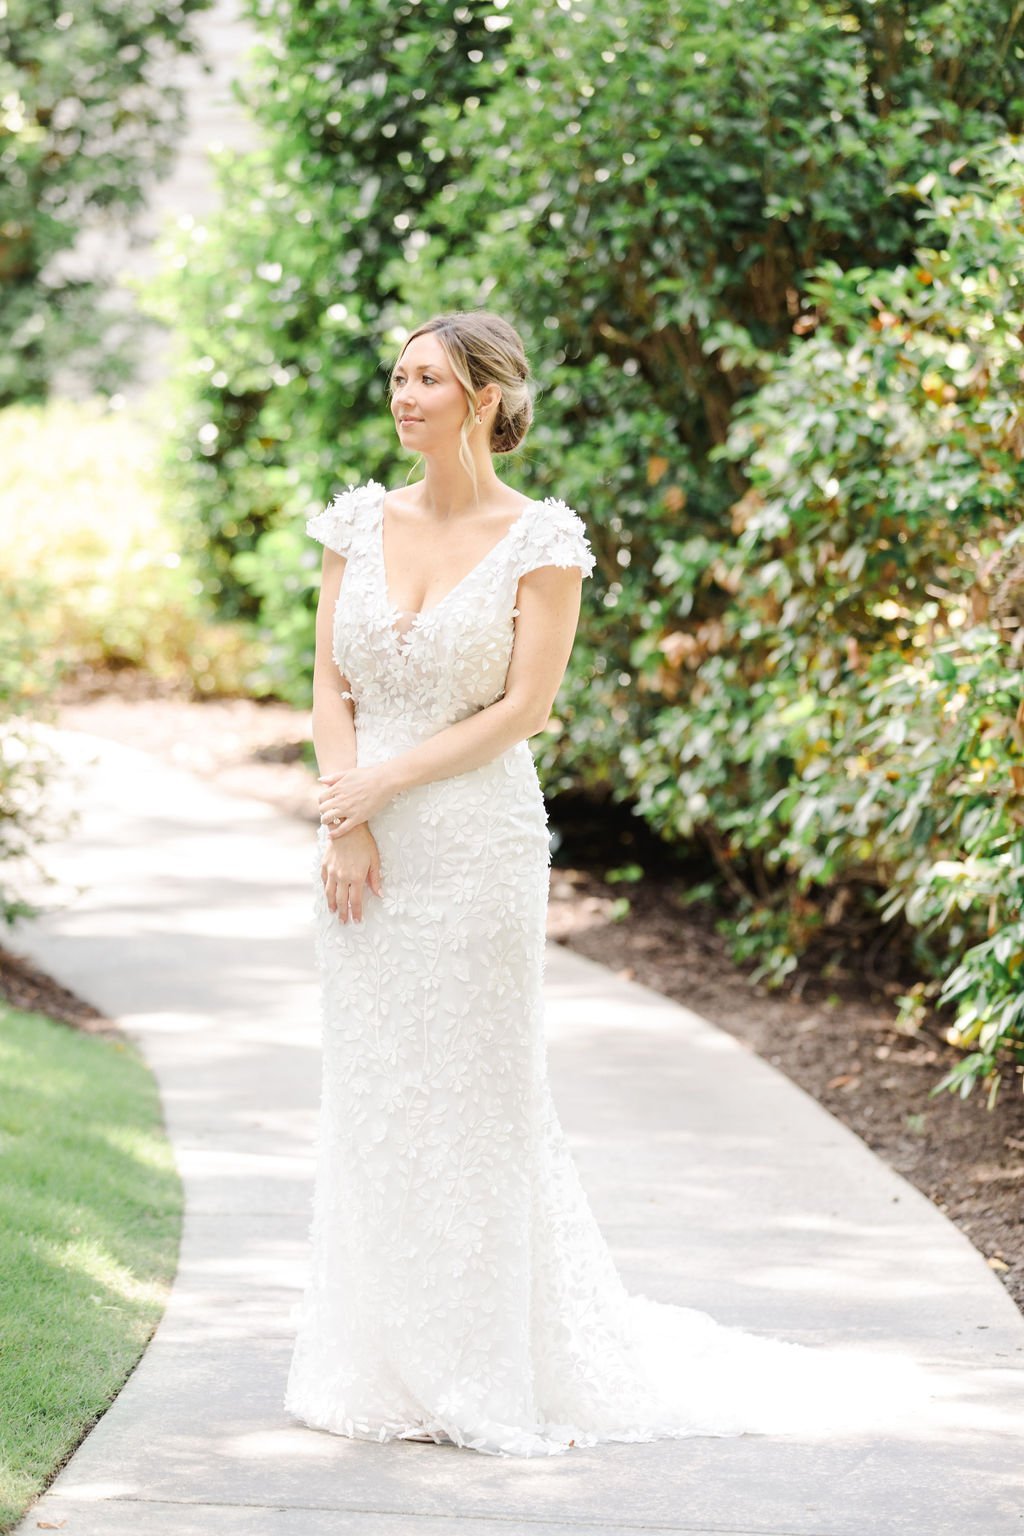 savannah-bride-katelyn-in-darcy-by-made-with-love-a-chic-modern-wedding-dress-witth-cap-sleeves-and-3d-floral-applique-purchased-from-savannah-bridal-shop-ivory-and-beau-3.jpg